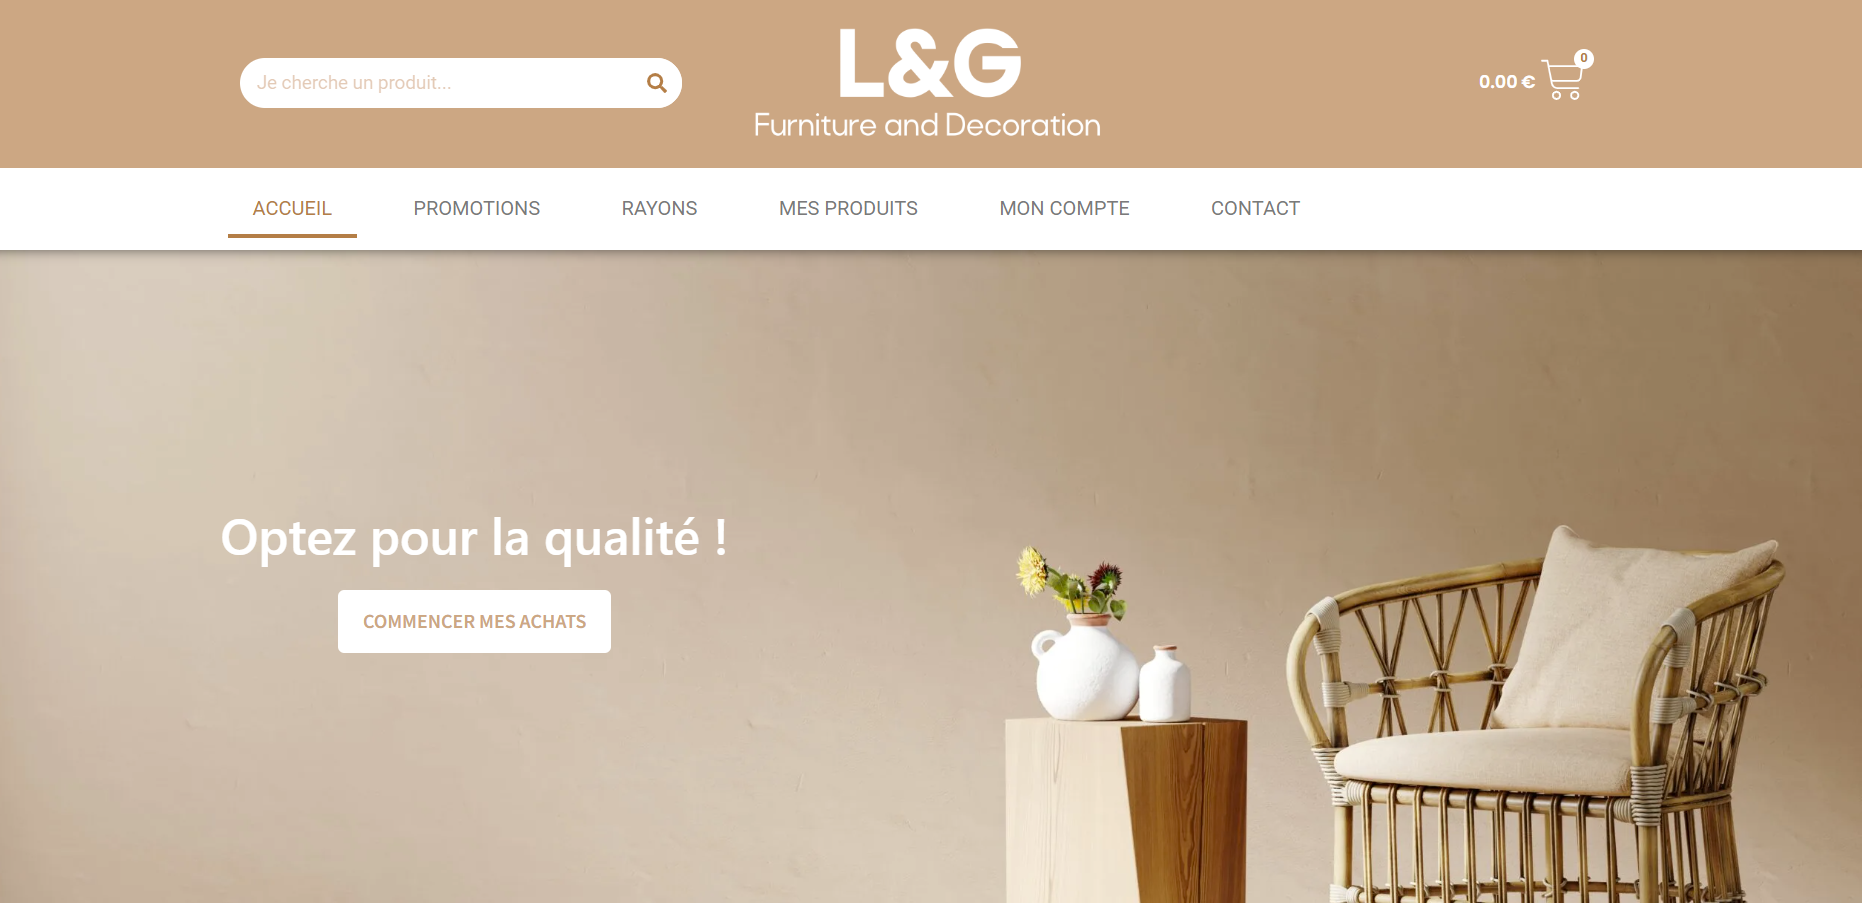 L&G Furniture and Decoration